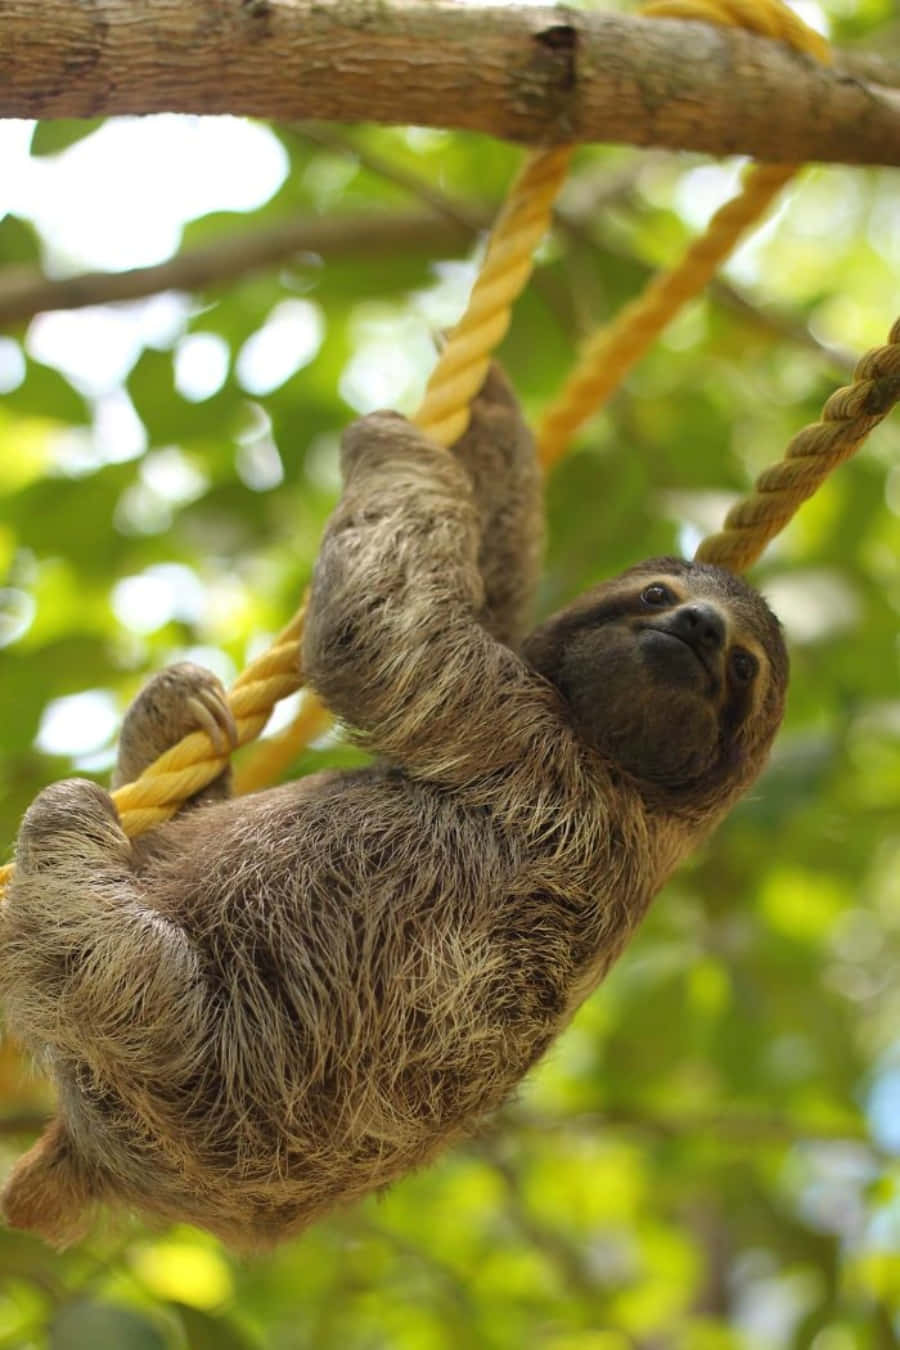 Cute Sloth Climbing On Rope Picture